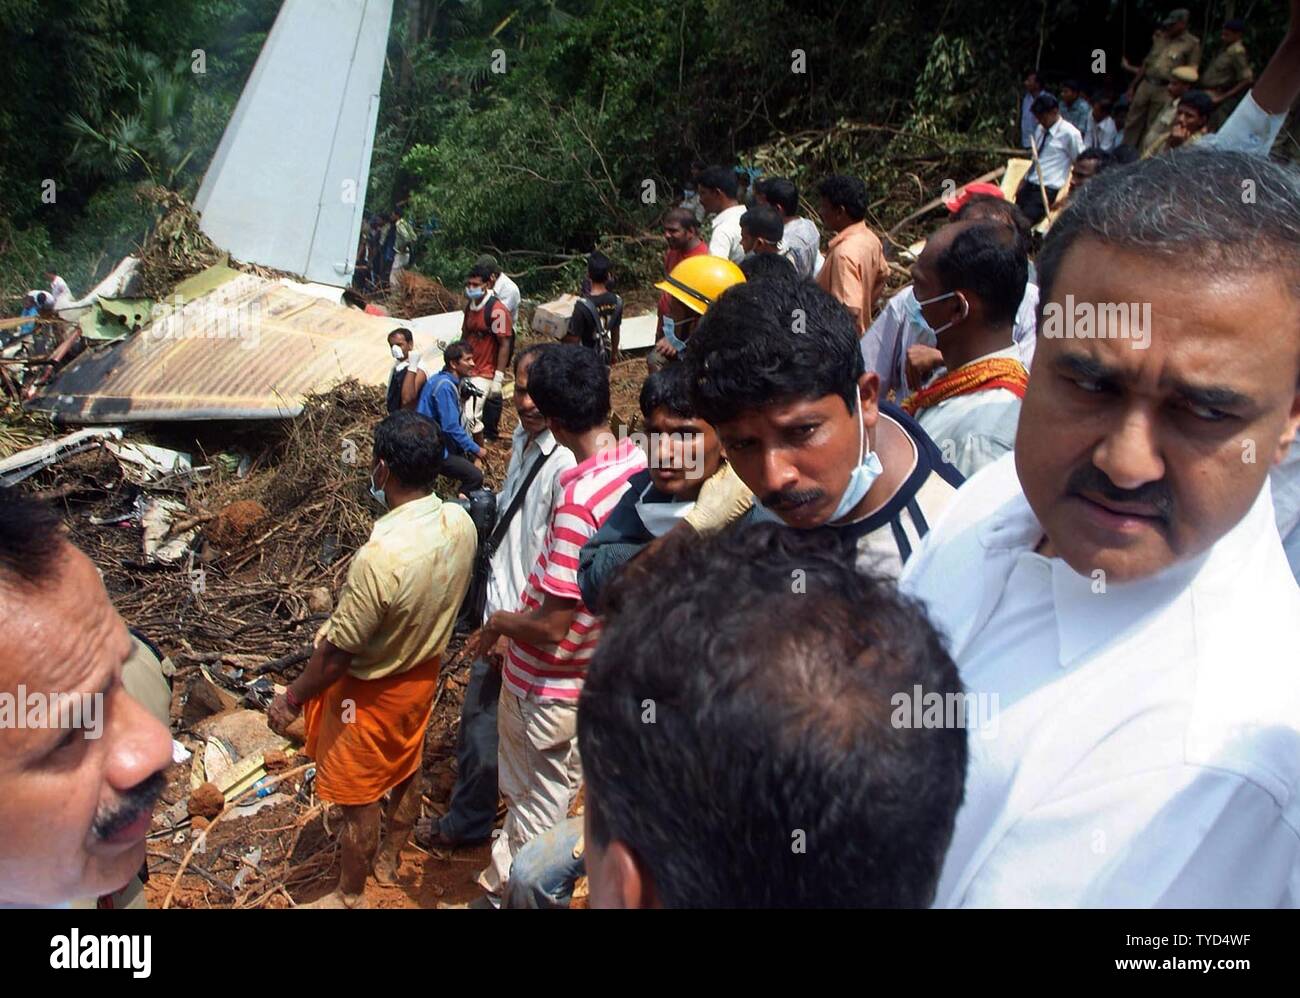 Ambulances and people gather near the site Air India Express plane after it overshot the runway and crashed at Bajpe Airport in Mangalore, India on May 22, 2010. Of the 166 passengers and crew on board the plane, only 8 survived. UPI Stock Photo